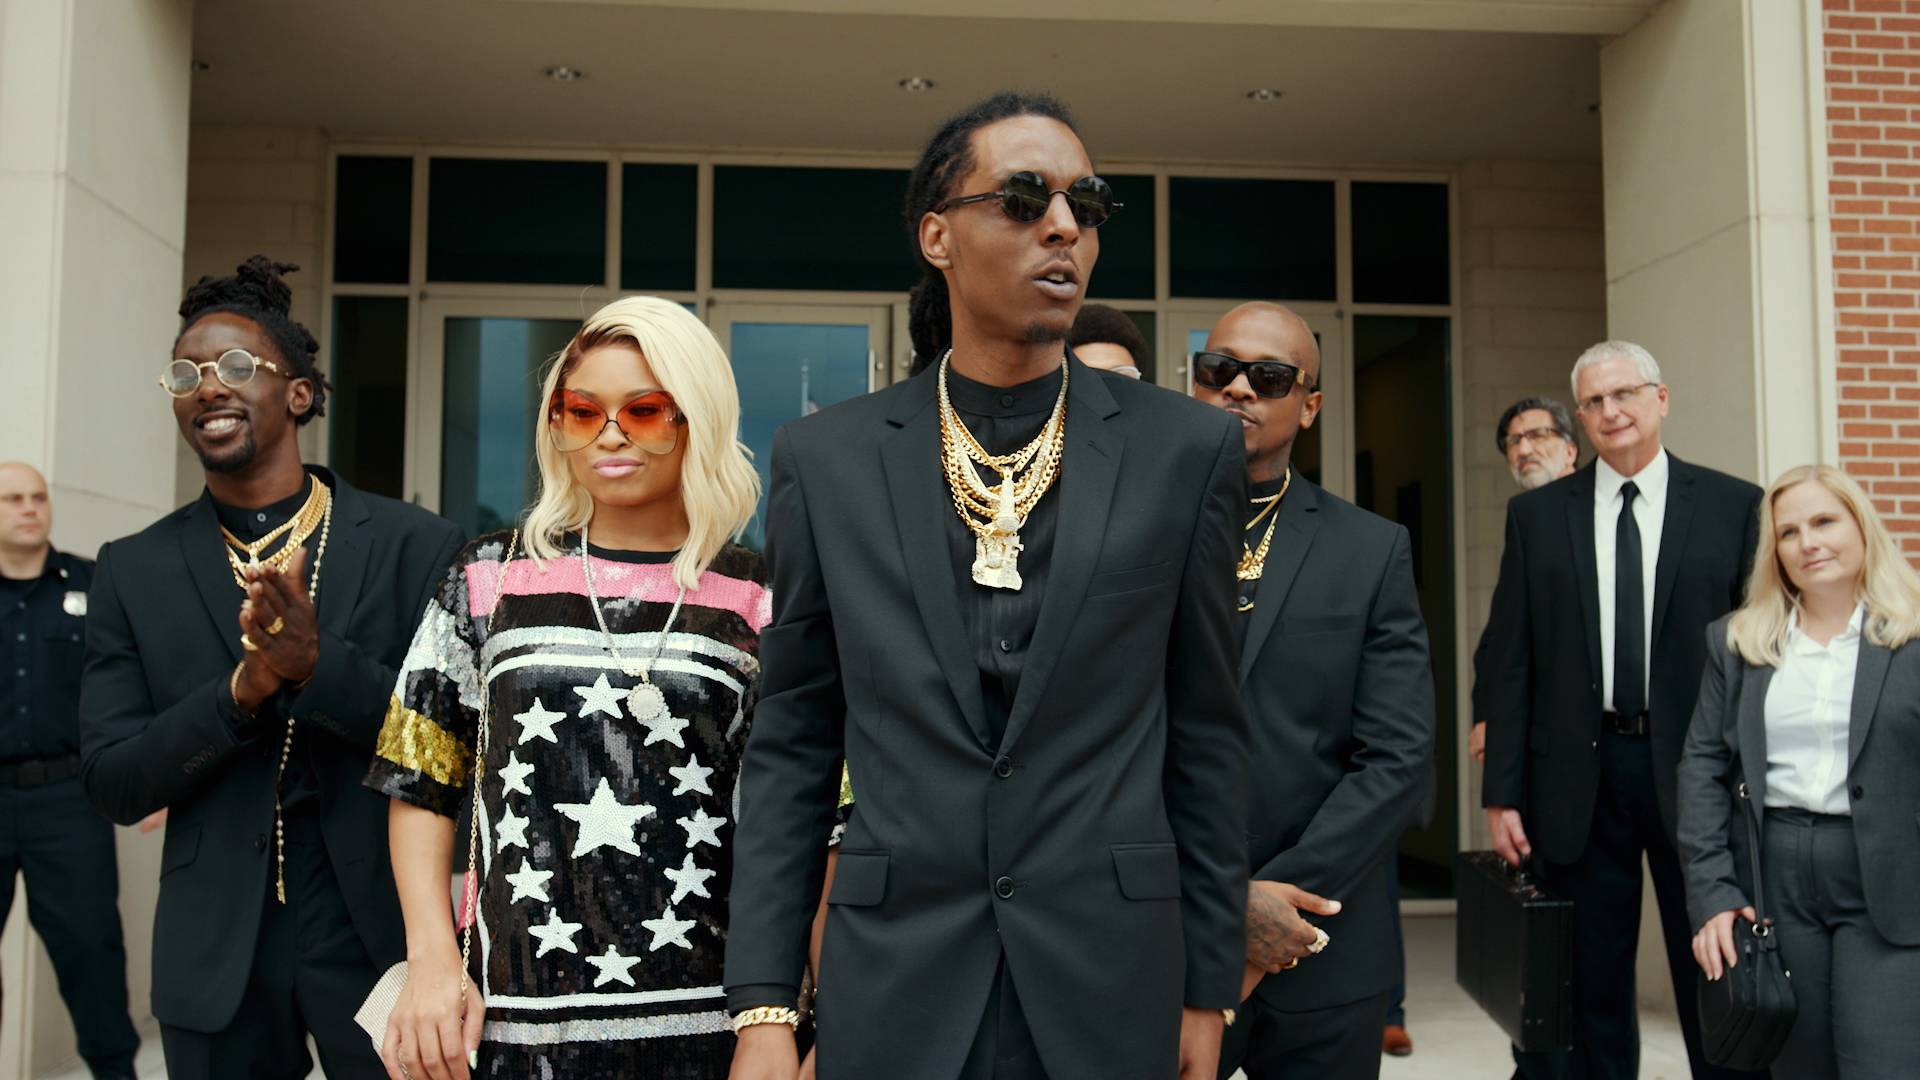 A rogue FBI agent makes his case in court after trying to take down an Atlanta rap group with a major drug operation in this episode inspired by Migos's track "Slippery."